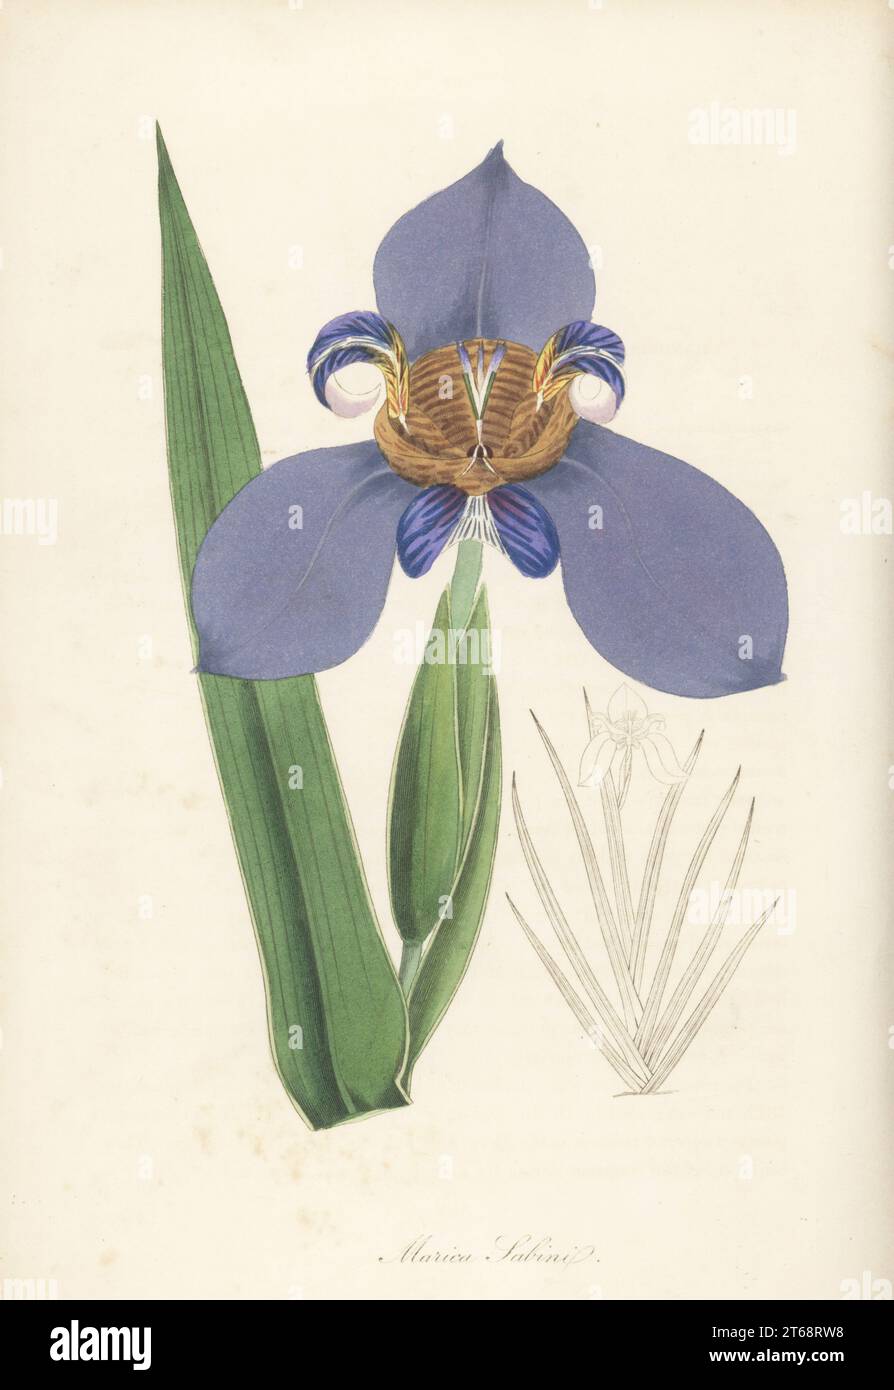 North's false flag or walking iris, Trimezia northiana. Native to Brazil, introduced to the Horticultural Society in 1822. Captain Sabine's marica, Marica sabini. Handcoloured engraving from Joseph Paxtons Magazine of Botany, and Register of Flowering Plants, Volume 1, Orr and Smith, London, 1834. Stock Photo